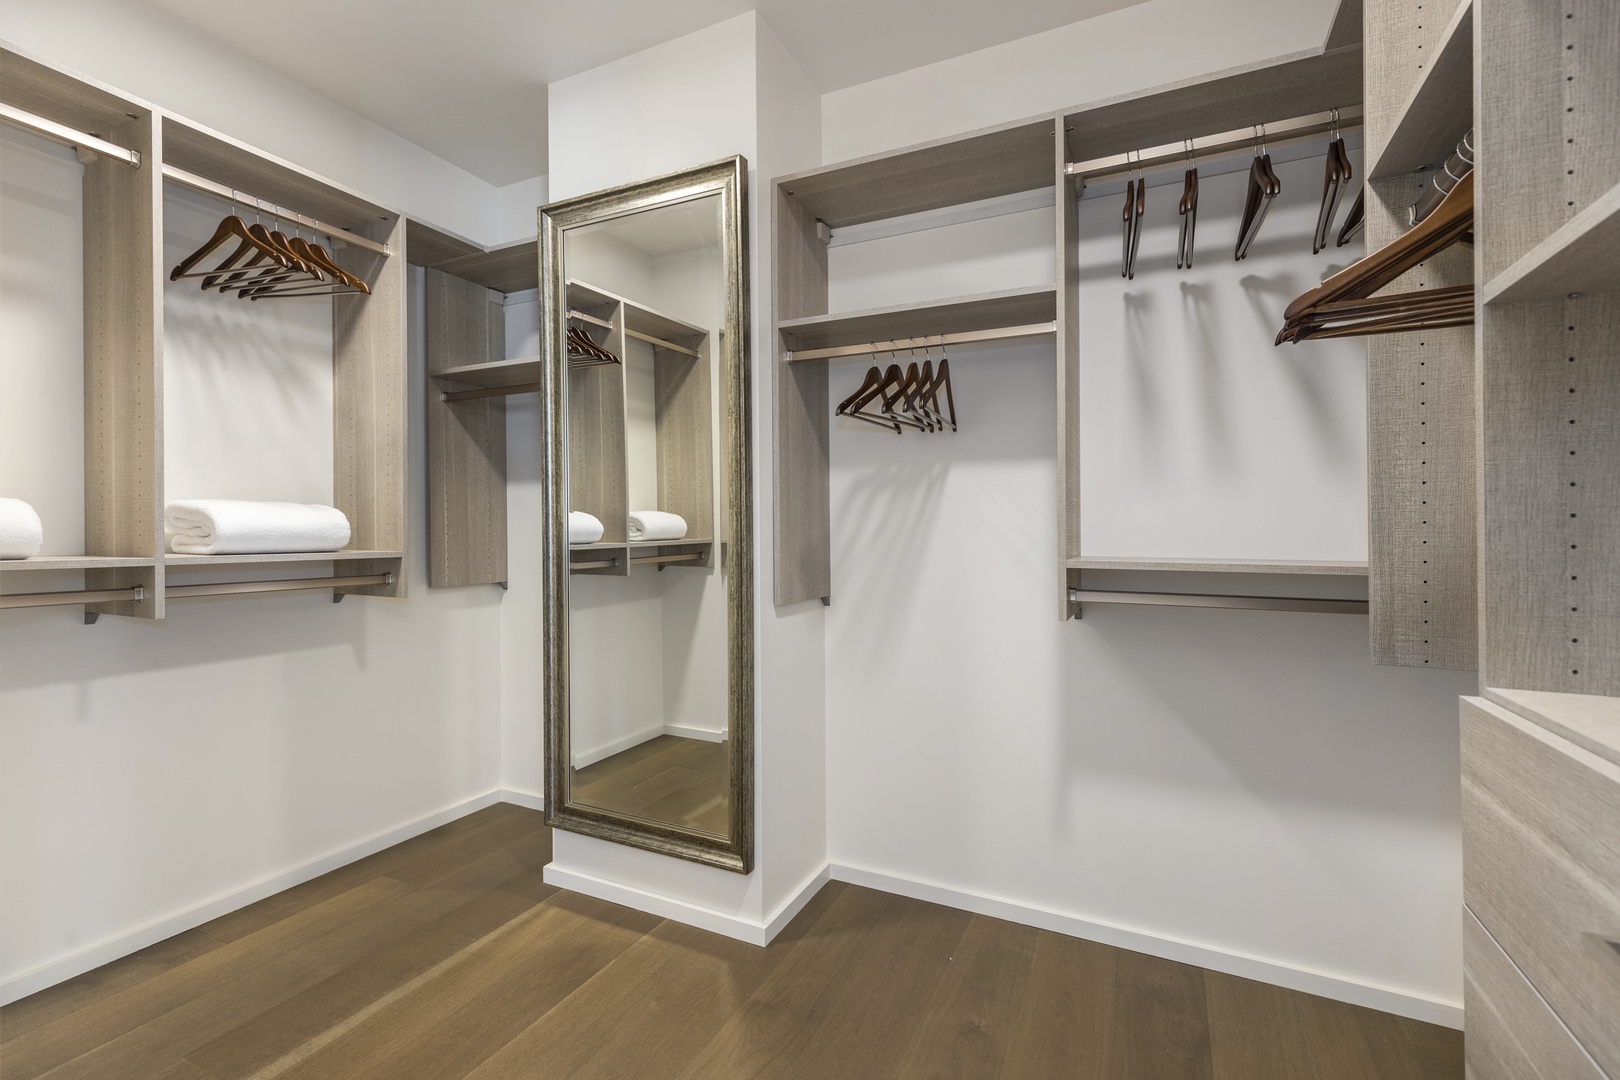 Honolulu Vacation Rentals, Park Lane Sky Resort - The large closet has a great deal of space to store your personal belongings